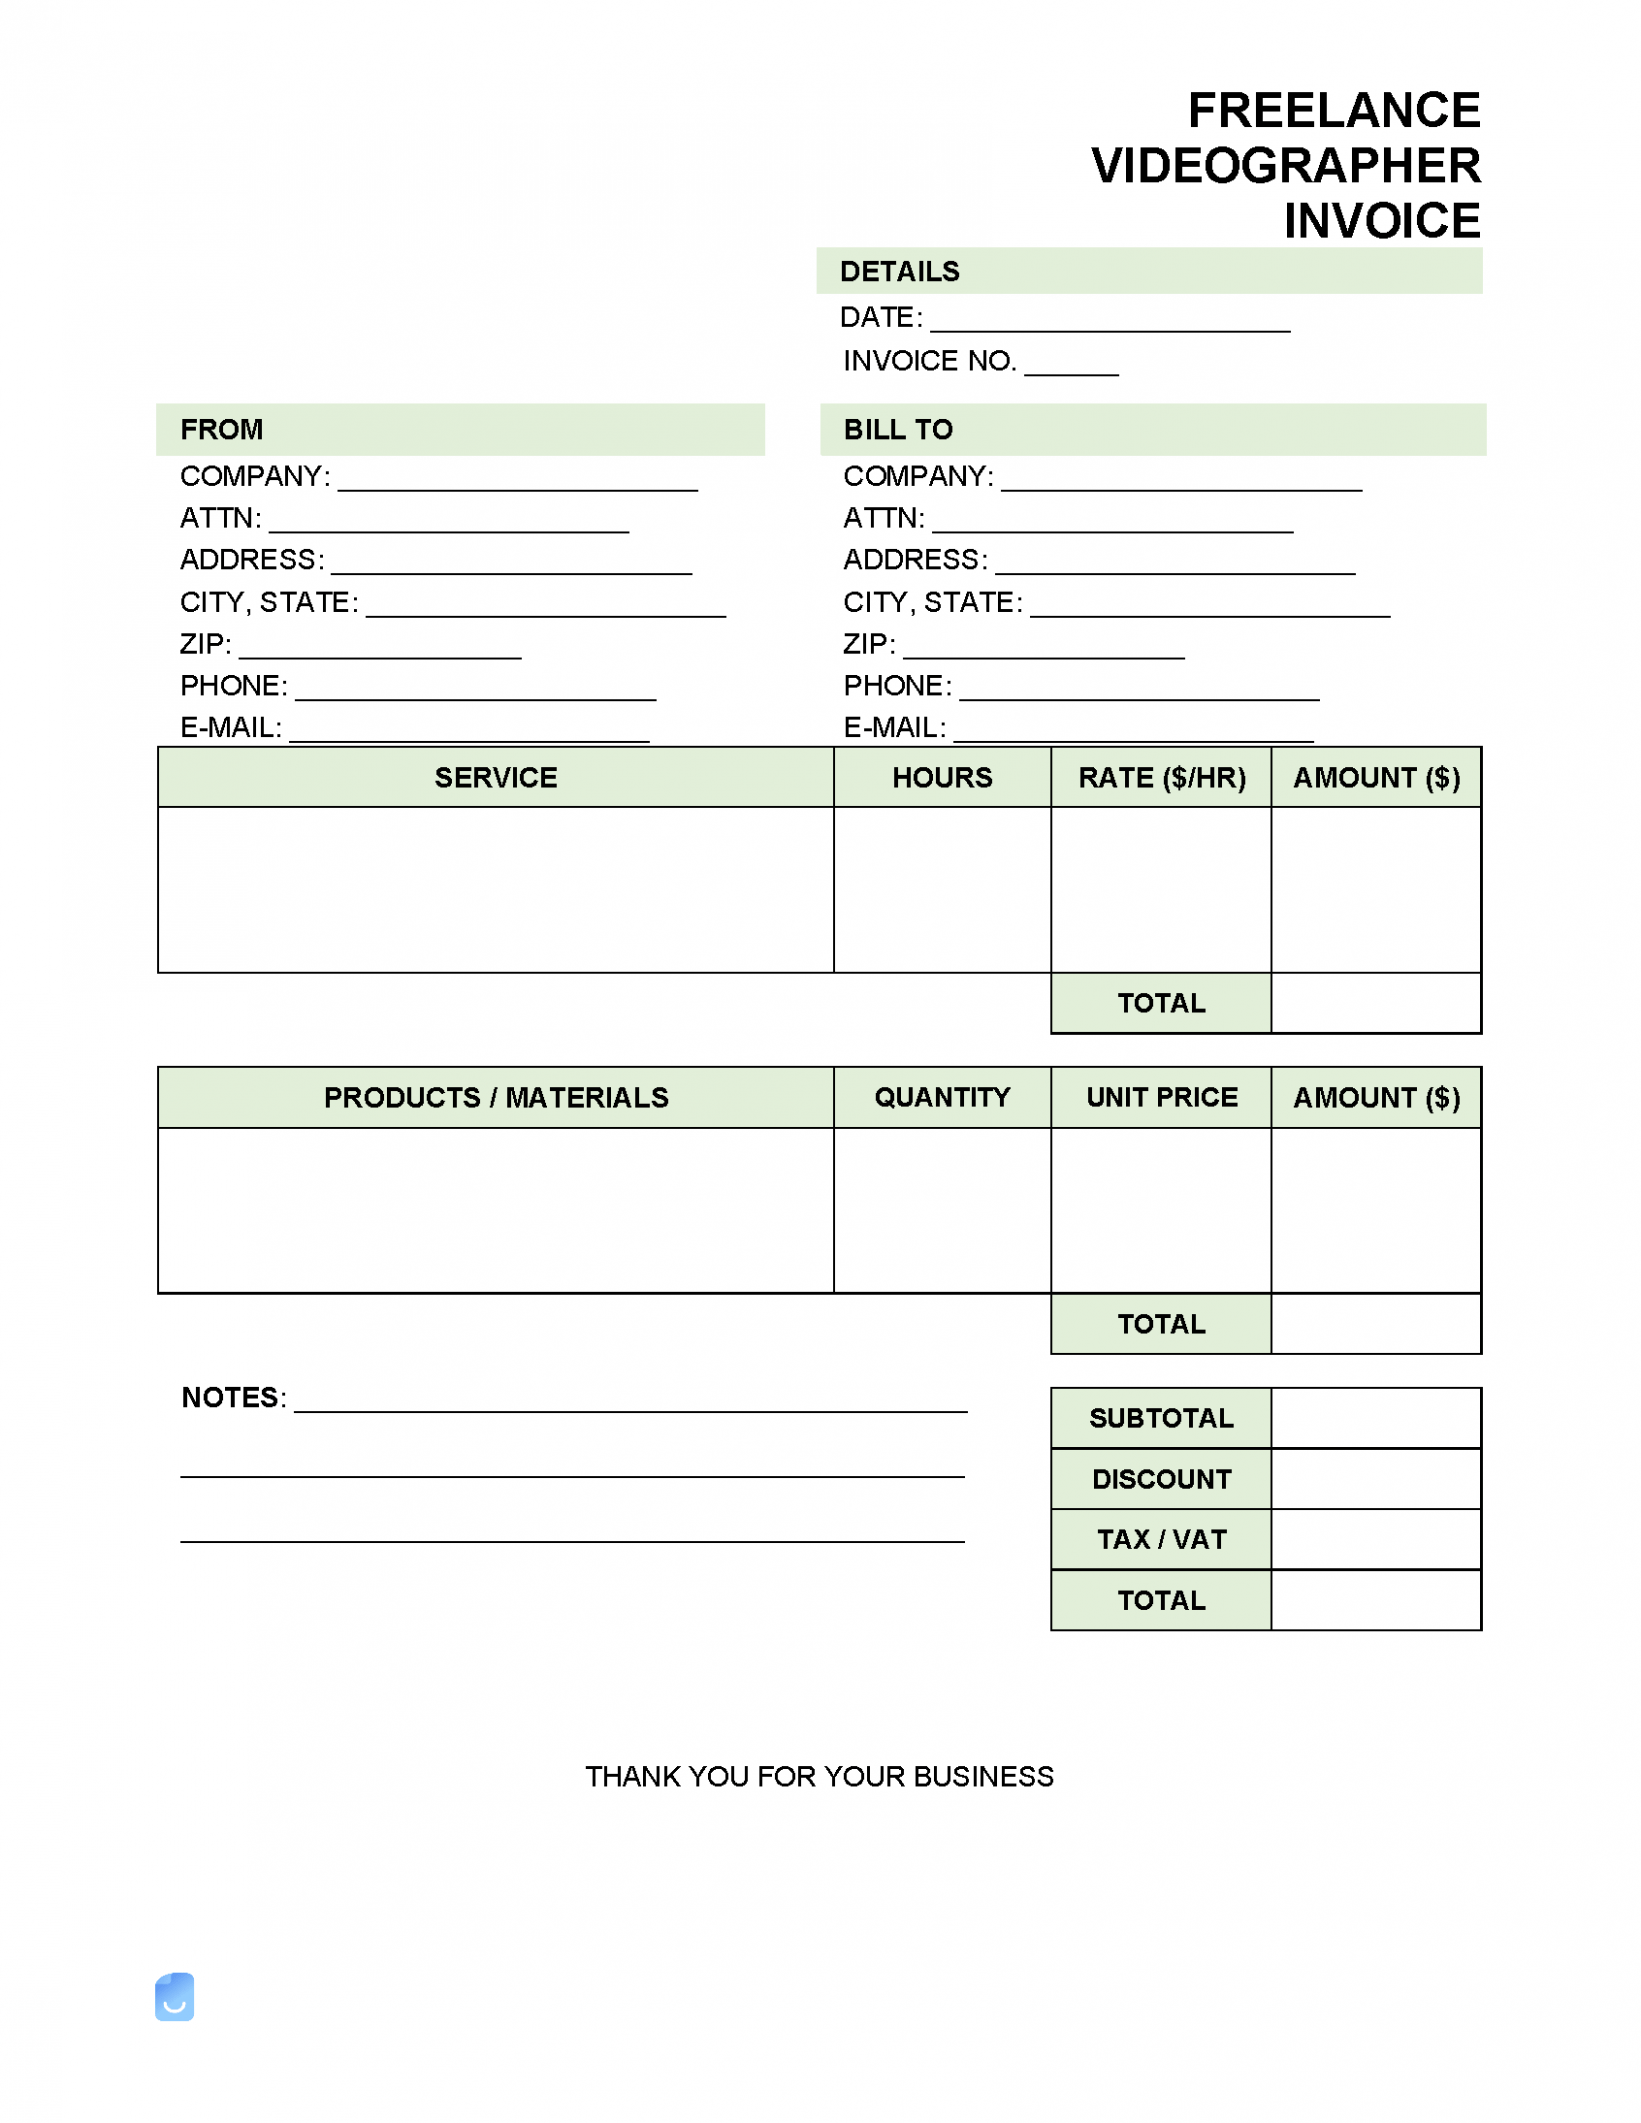 Printable Video Editor Invoice Template Excel